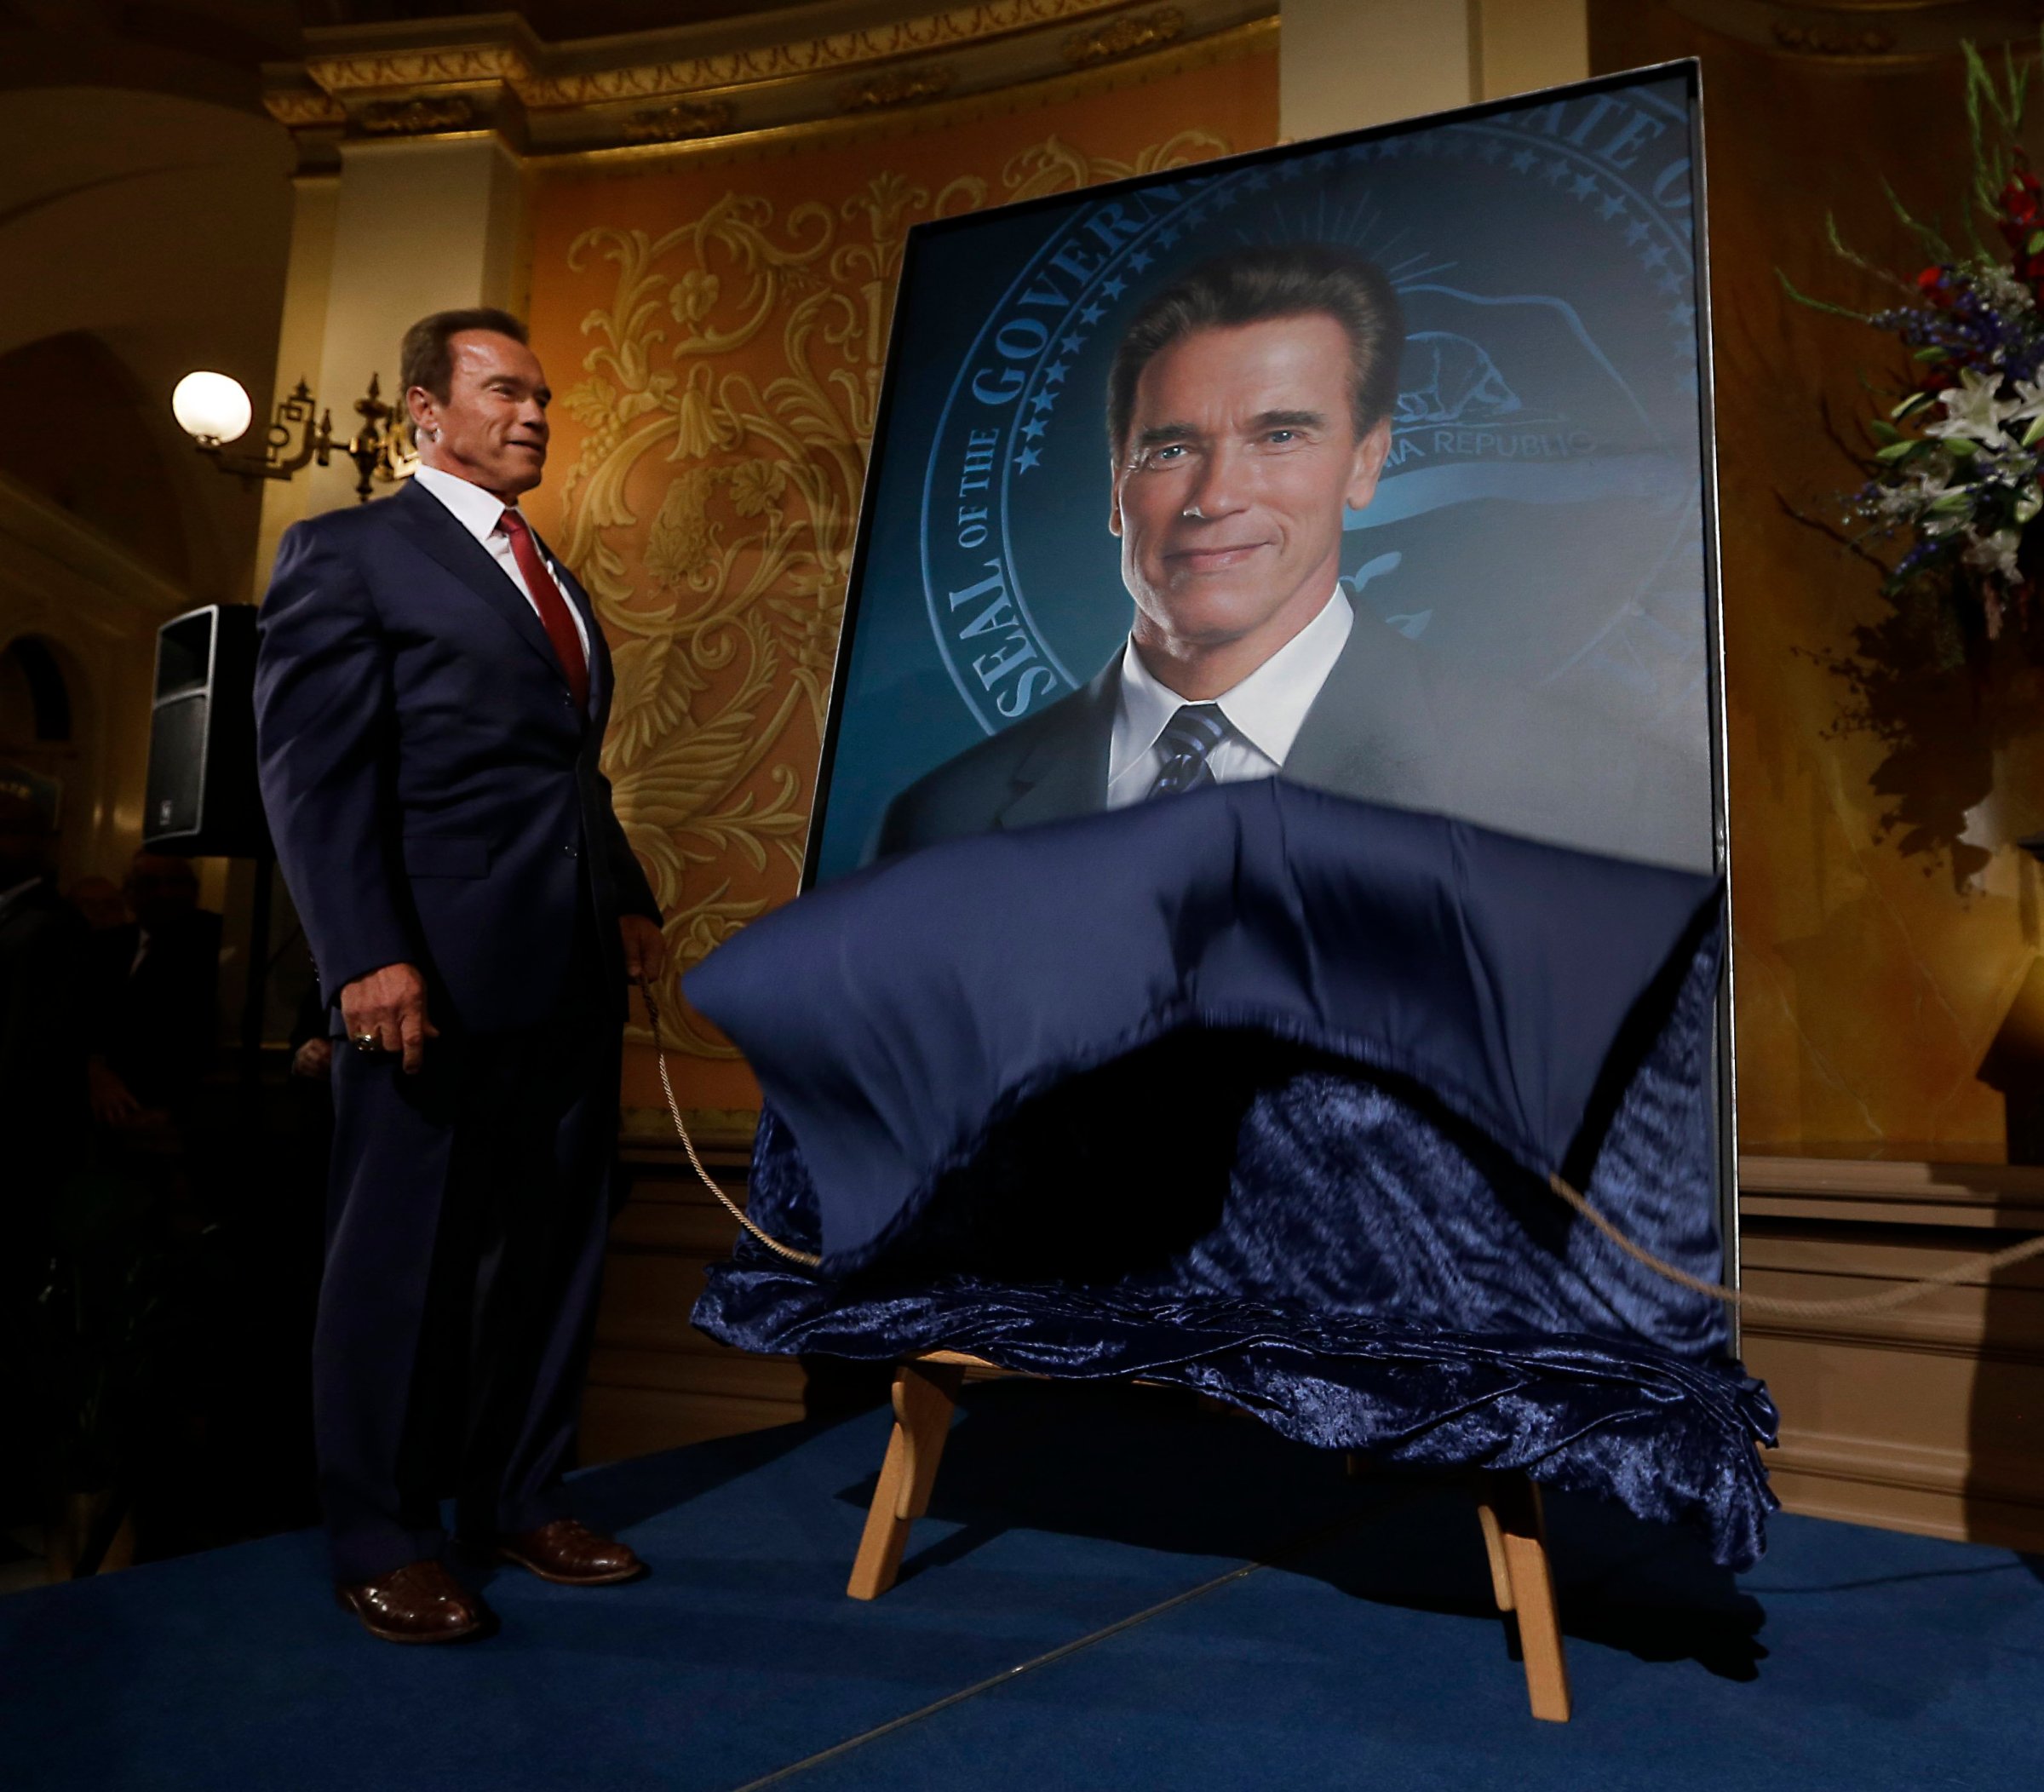 Former Gov. Arnold Schwarzenegger unveil's his official portrait during ceremonies at the Capitol in Sacramento, Calif. on Sept. 8, 2014.